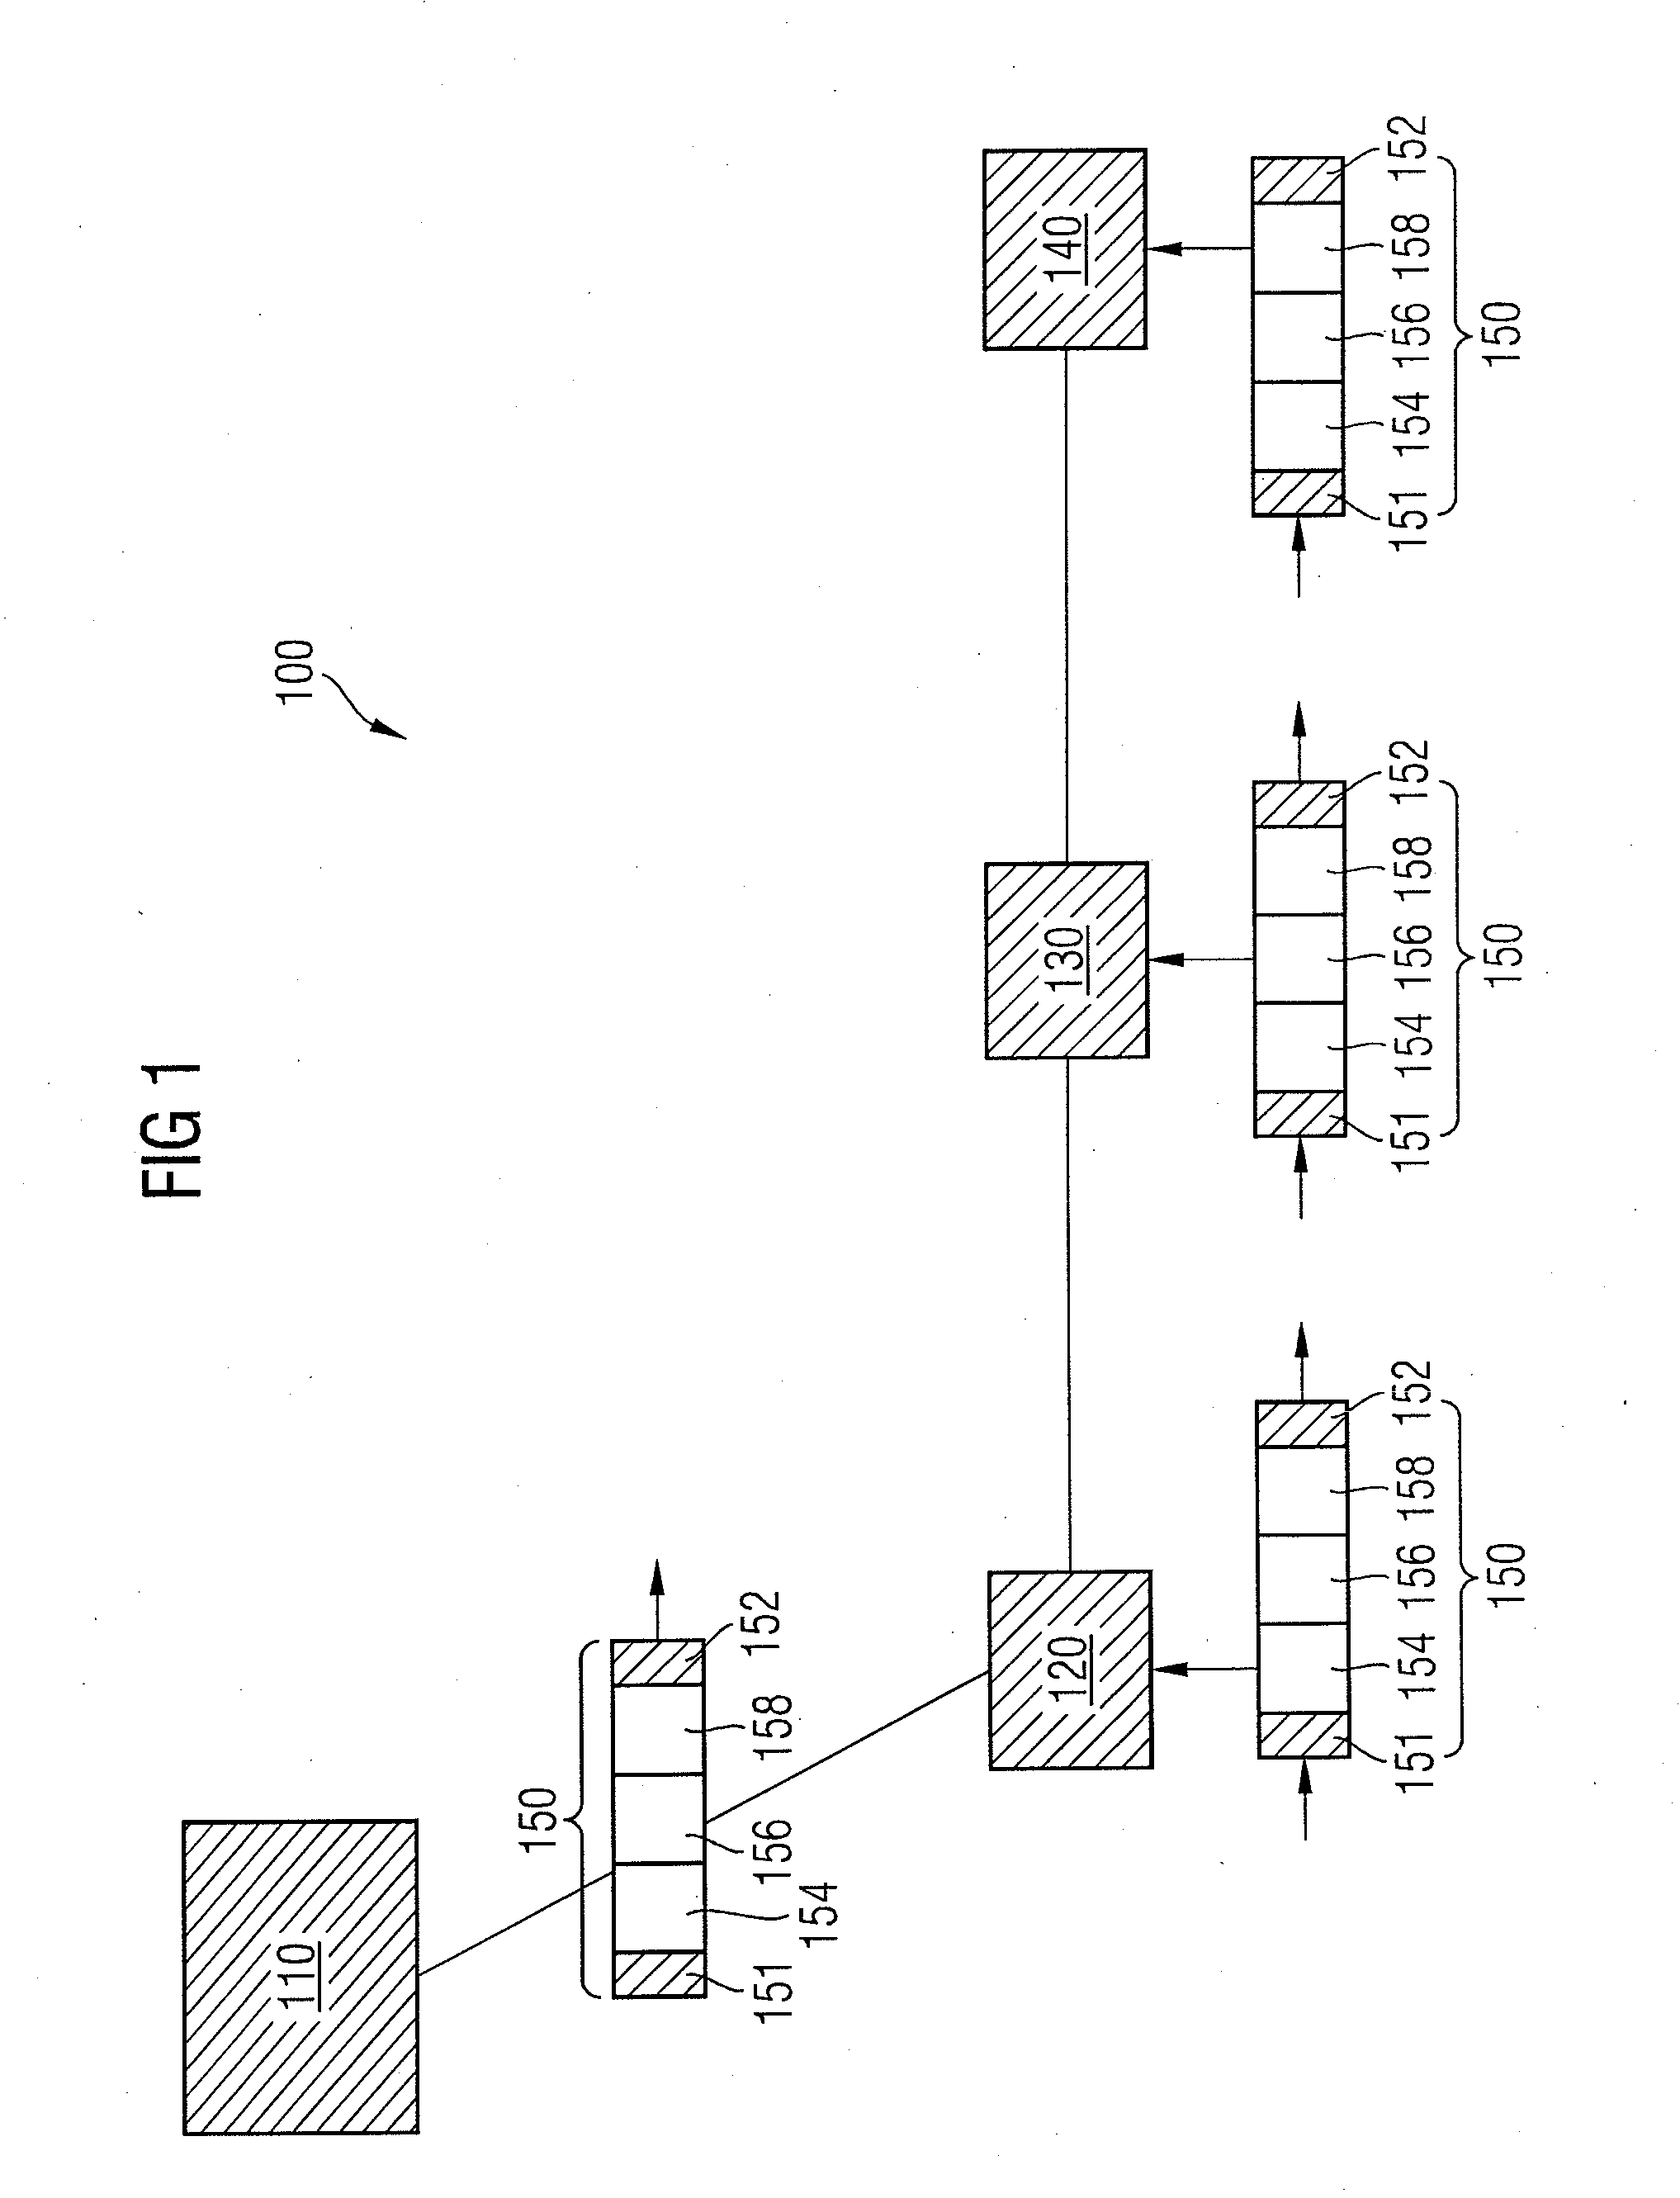 Method for real-time data transmission in a communication network